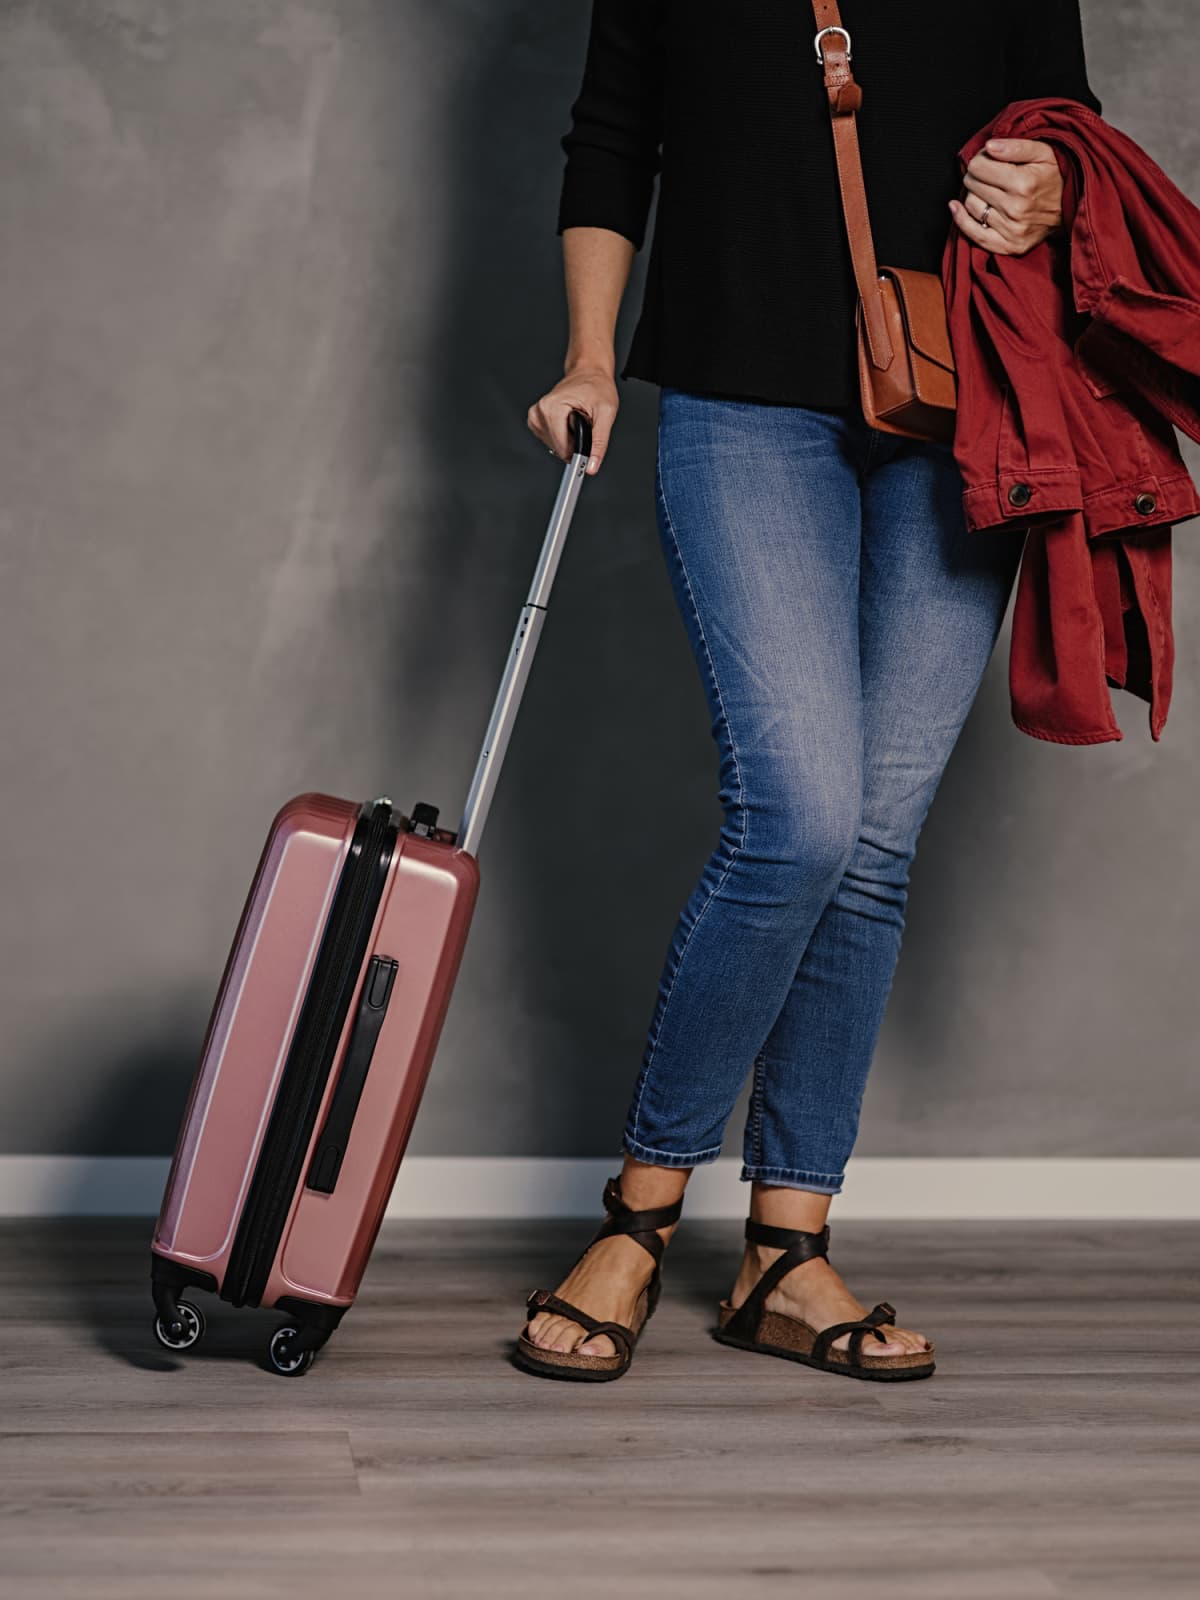 Woman with cabin suitcase bags ready to travel
Photo taken indoors of casual woman ready for vacation with carry-on luggage